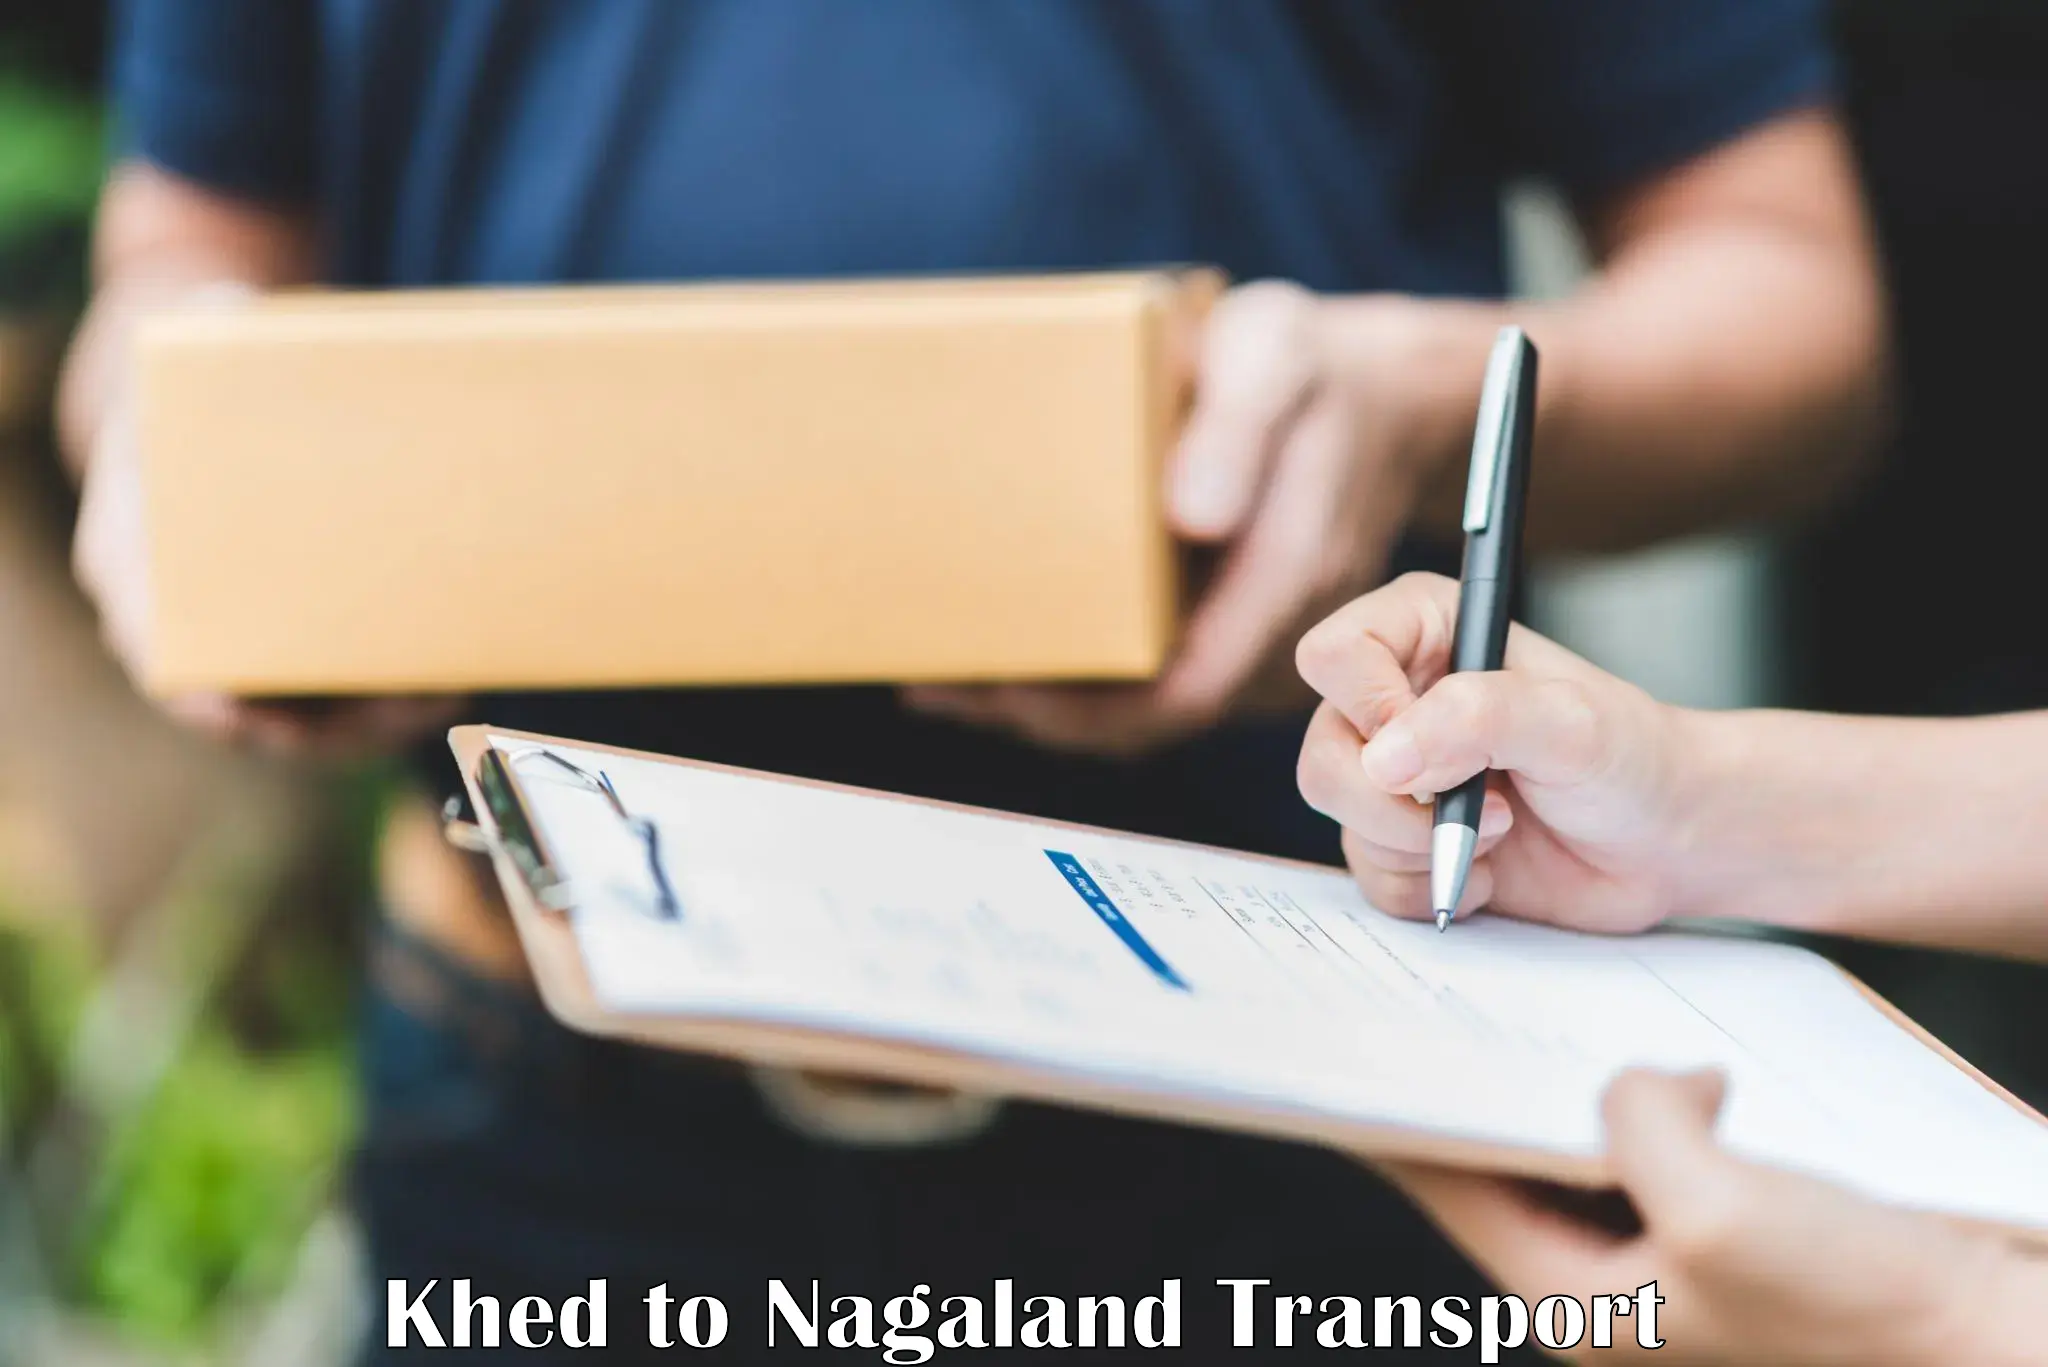 Daily transport service Khed to Dimapur